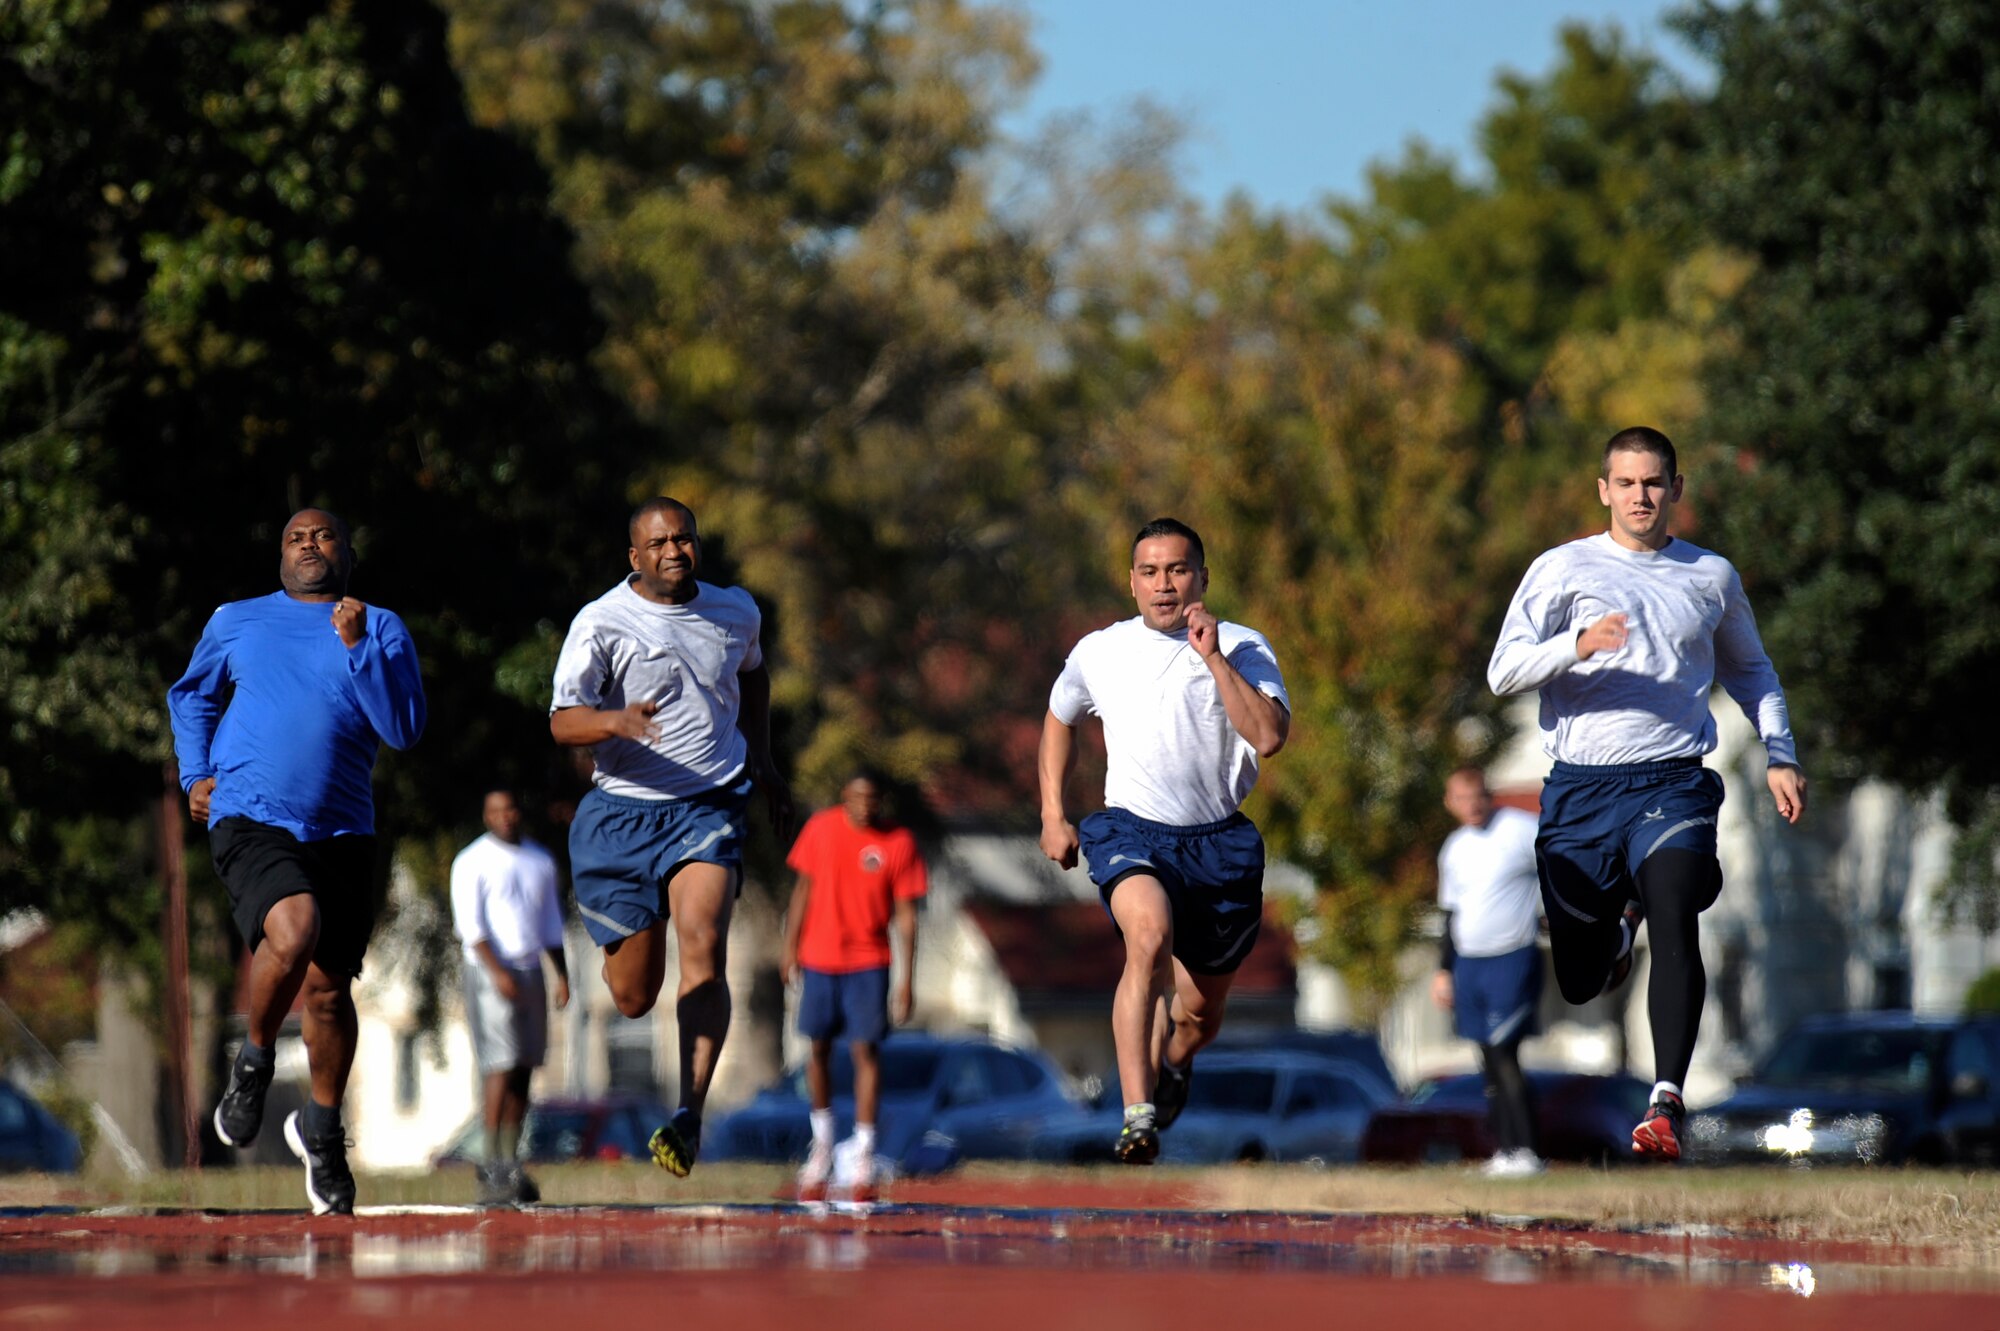 Participants run for the finish line during the 2012 Sports Day 100-meter dash on Barksdale Air Force Base, La., Nov. 16. Sports Day is comprised of various competitive athletic events to help promote physical fitness. (U.S. Air Force photo/Senior Airman Micaiah Anthony)(RELEASED)